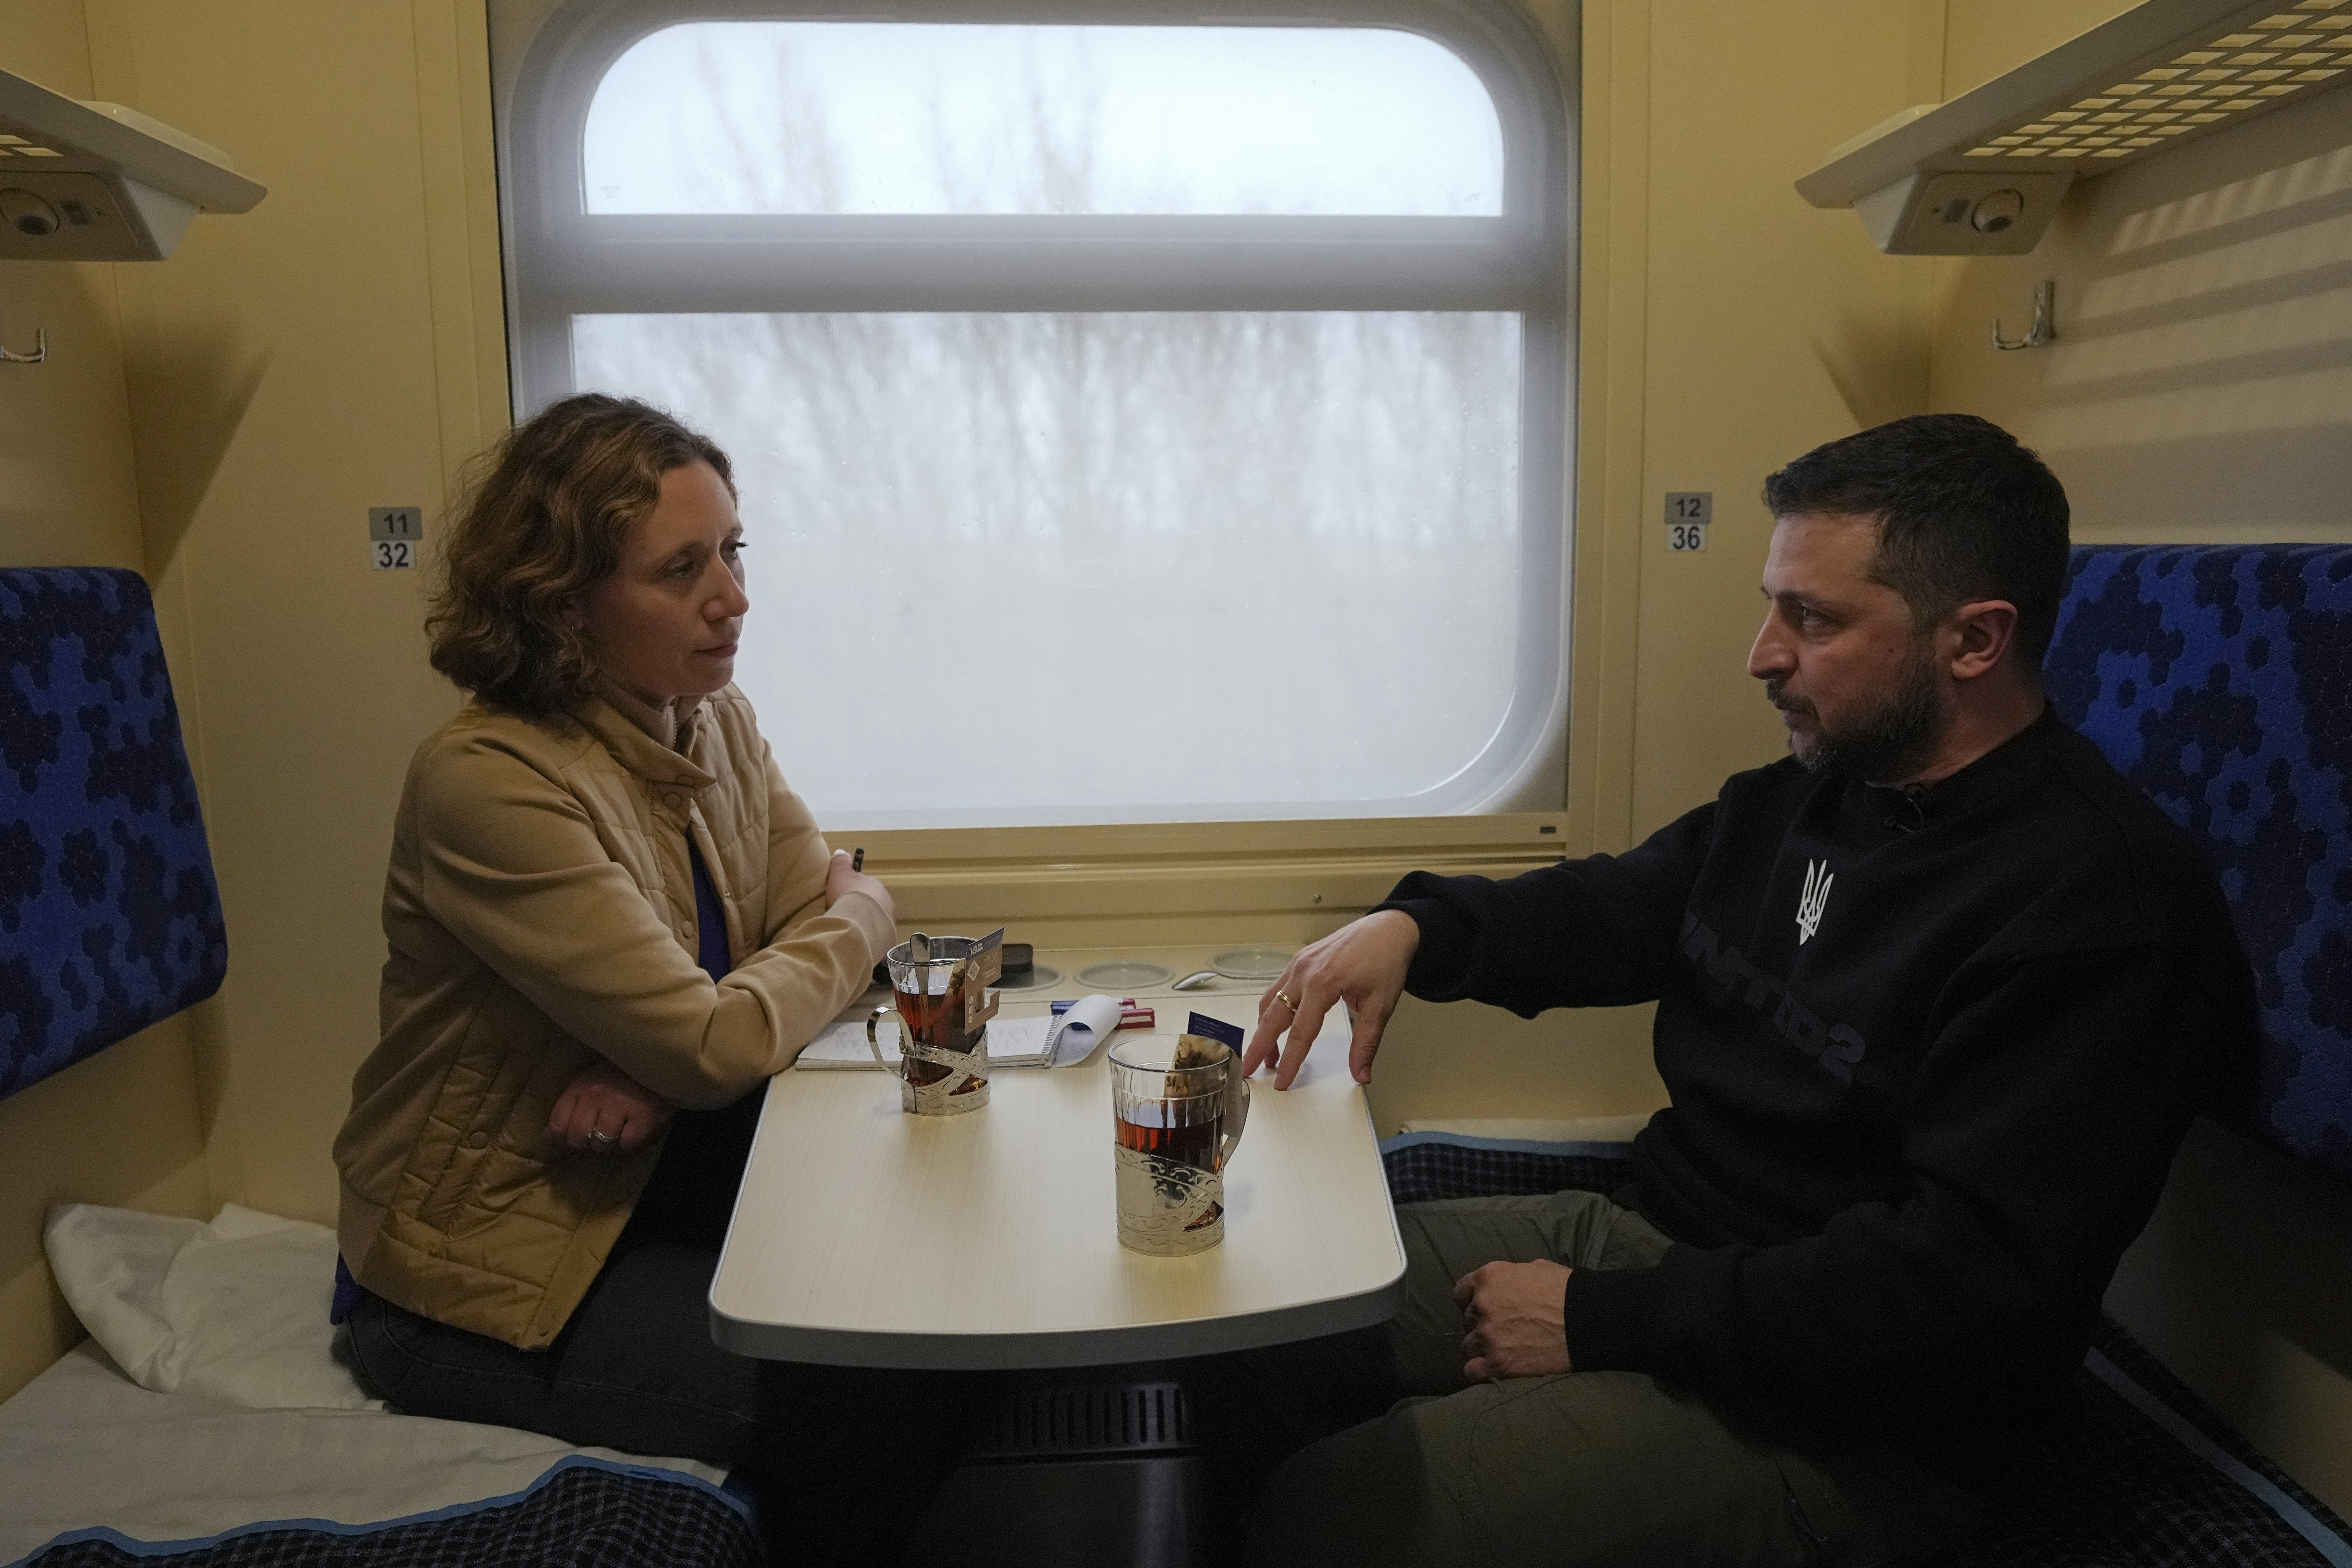 Ukraine's President Volodymyr Zelenskyy speaks in an interview with Julie Pace, vice president and editor-in-chief of The Associated Press, on a train traveling to Kiev from the Sumy region of Ukraine, Tuesday, March 28, 2023. In In the interview, Zelenskyy warned that unless his country wins a protracted battle in a key city in the east of the country, Russia could begin to build international support for a deal that would require Ukraine to make unacceptable concessions.  (AP Photo/Efrem Lukatsky)